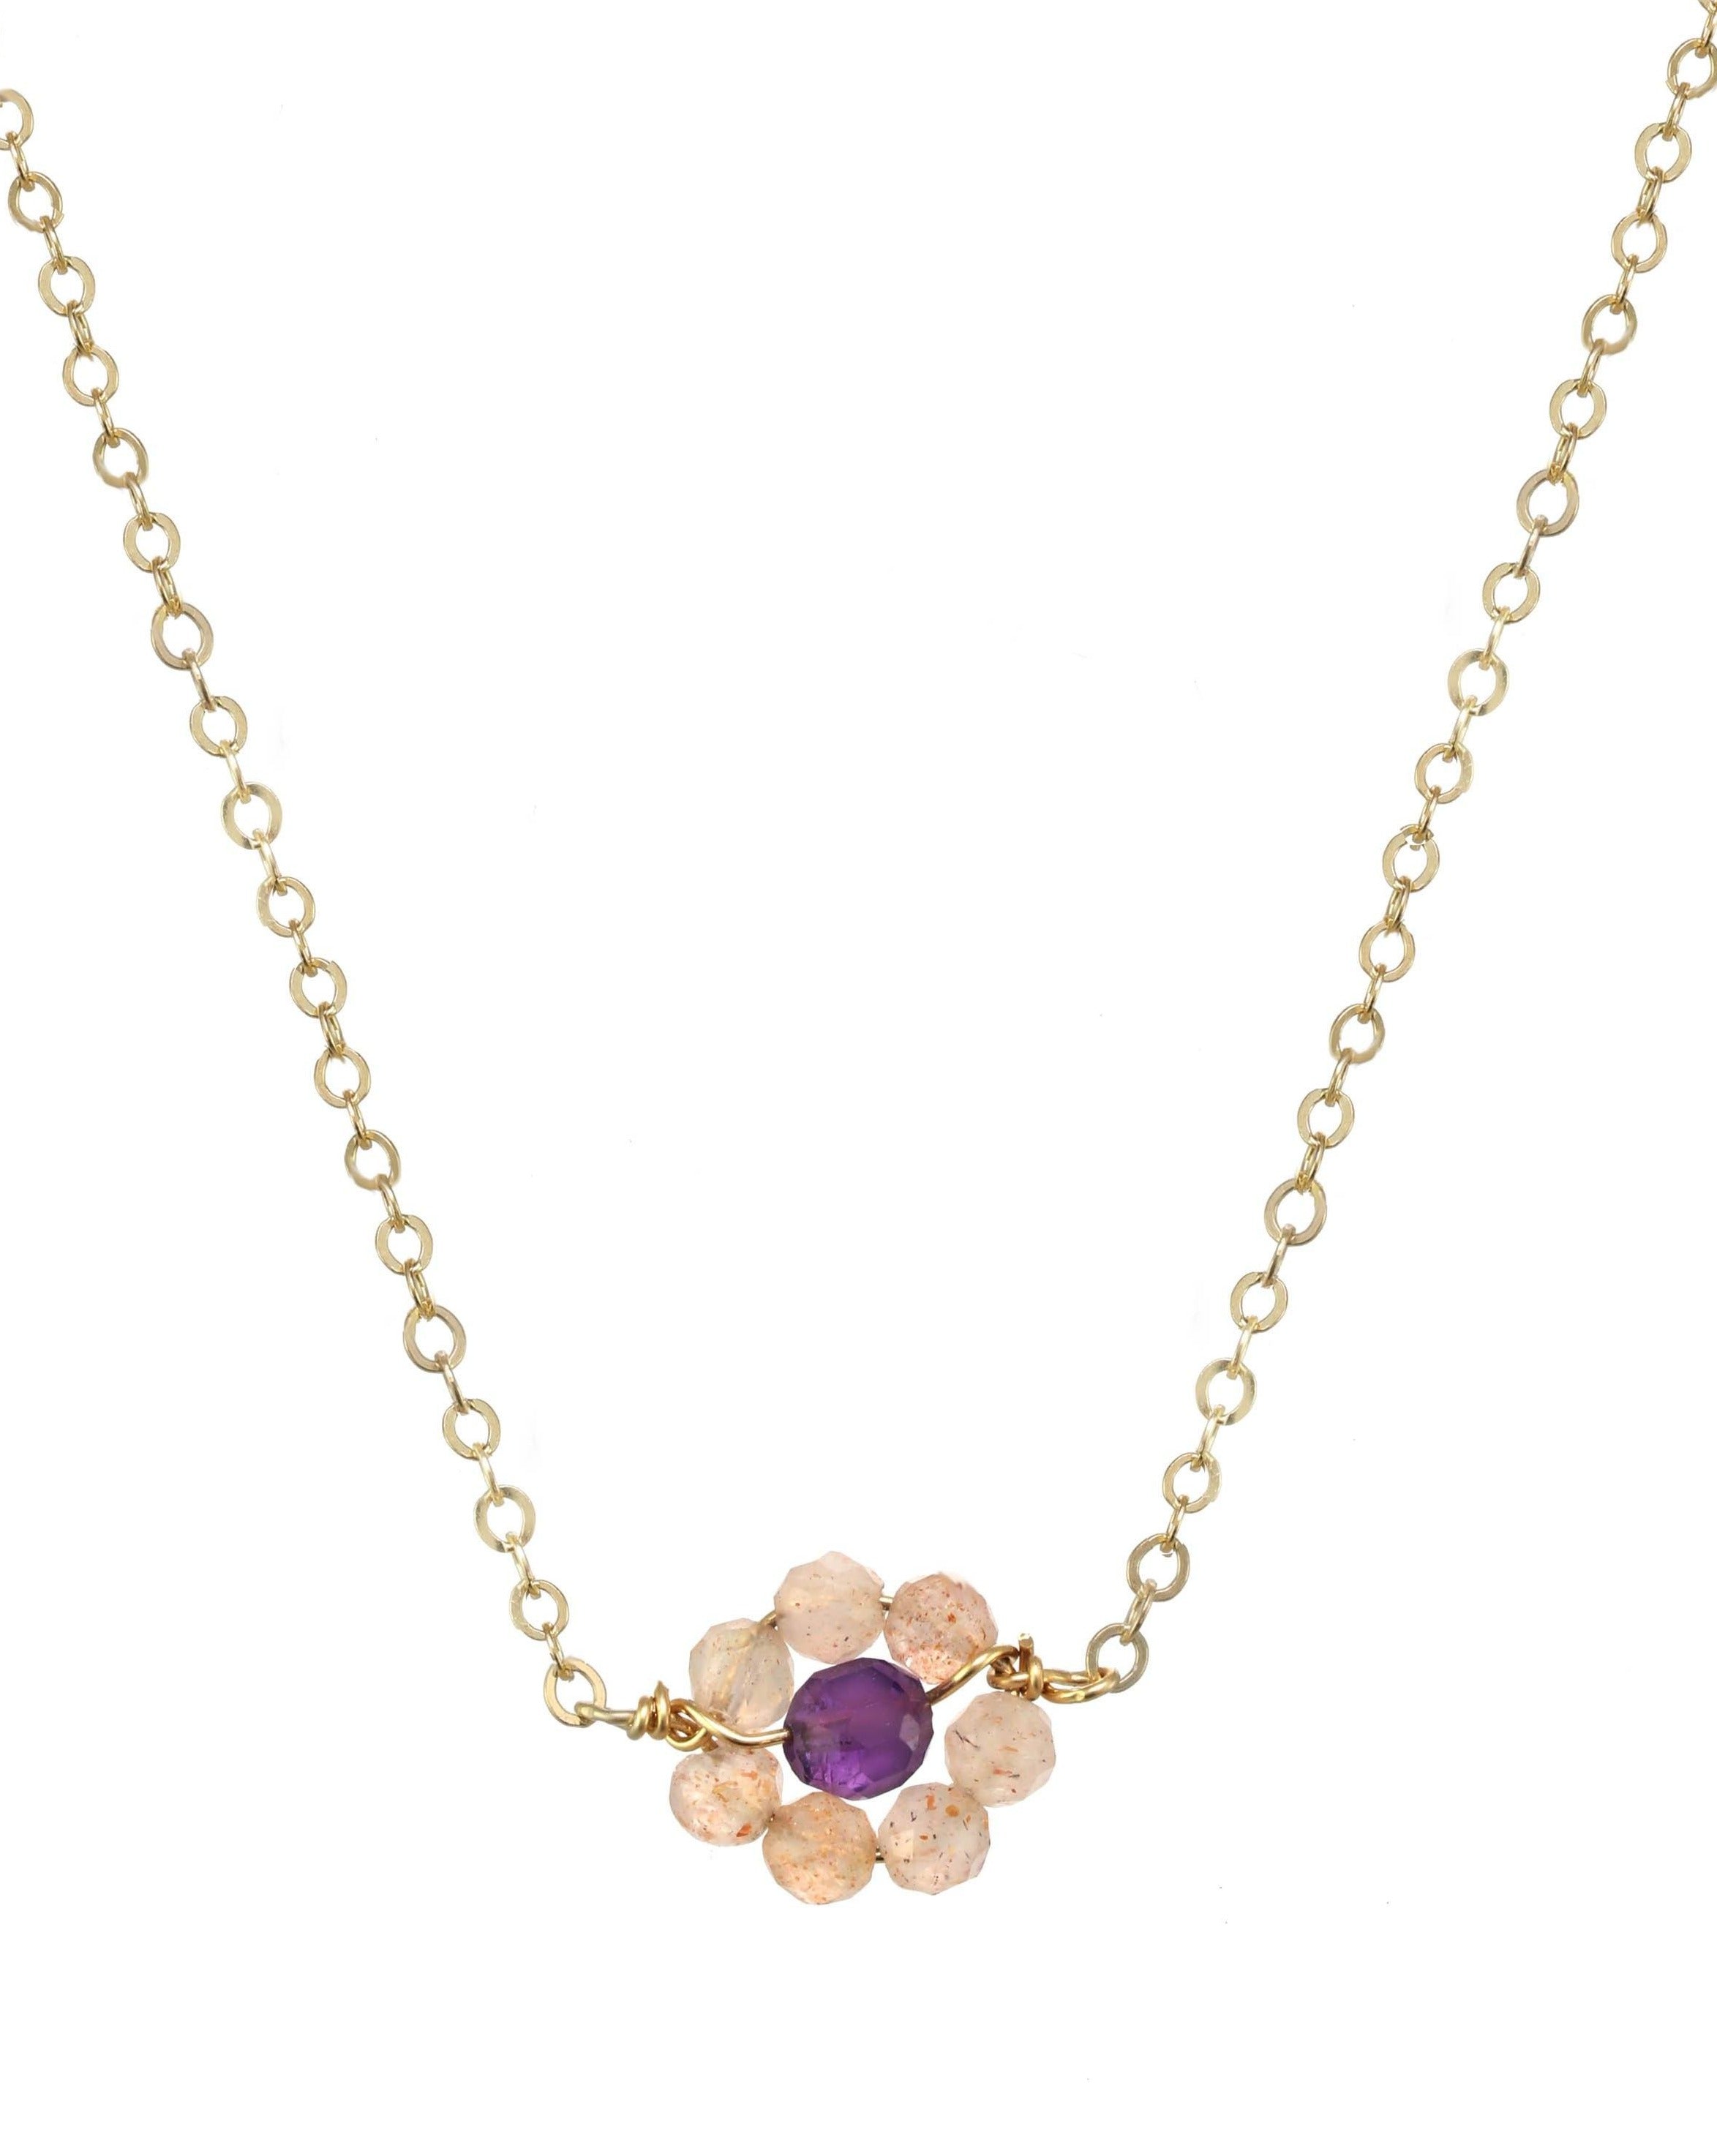 Little Hill Necklace by KOZAKH. A 16 to 18 inch adjustable length necklace, crafted in 14K Gold Filled, featuring 2mm faceted Imperial Topaz gems and a 3mm  faceted Garnet forming a flower charm.